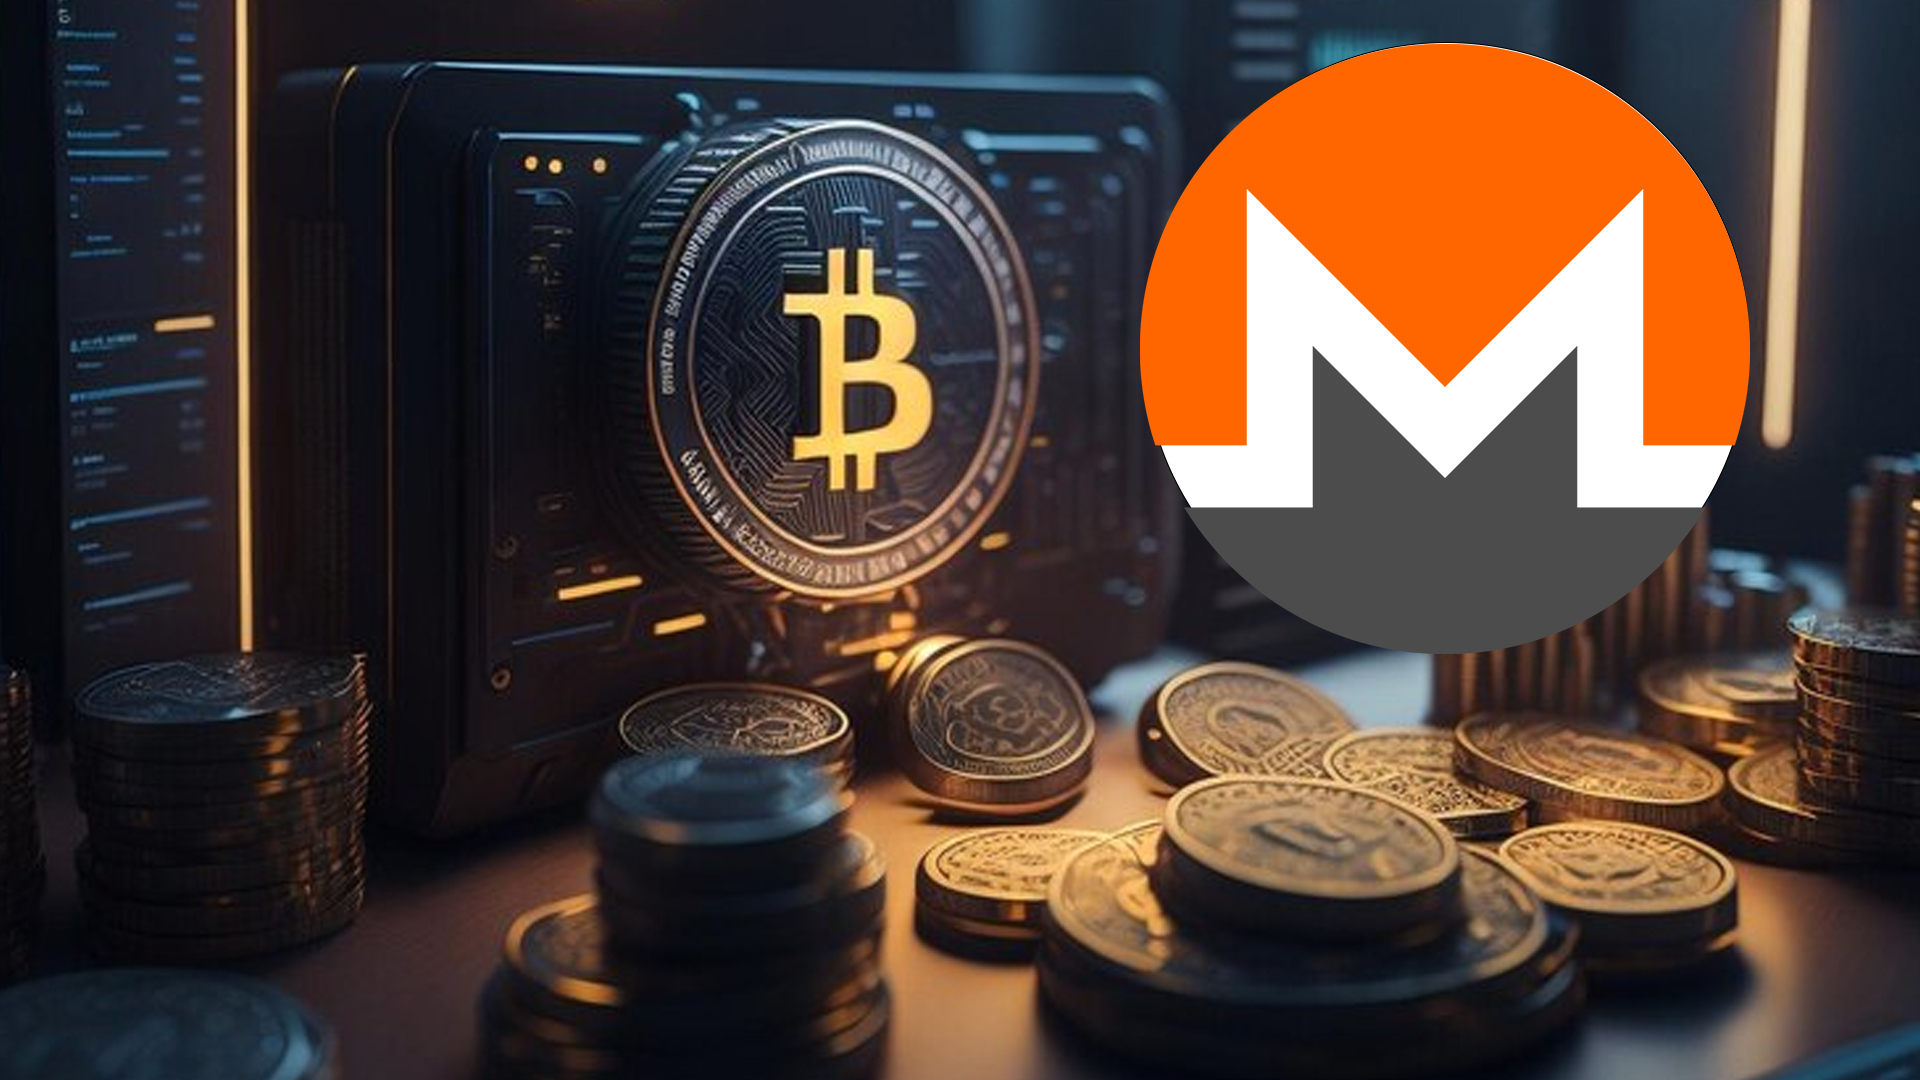 Monero Cryptocurrency Explained in Brief: Outset of Privacy Coins